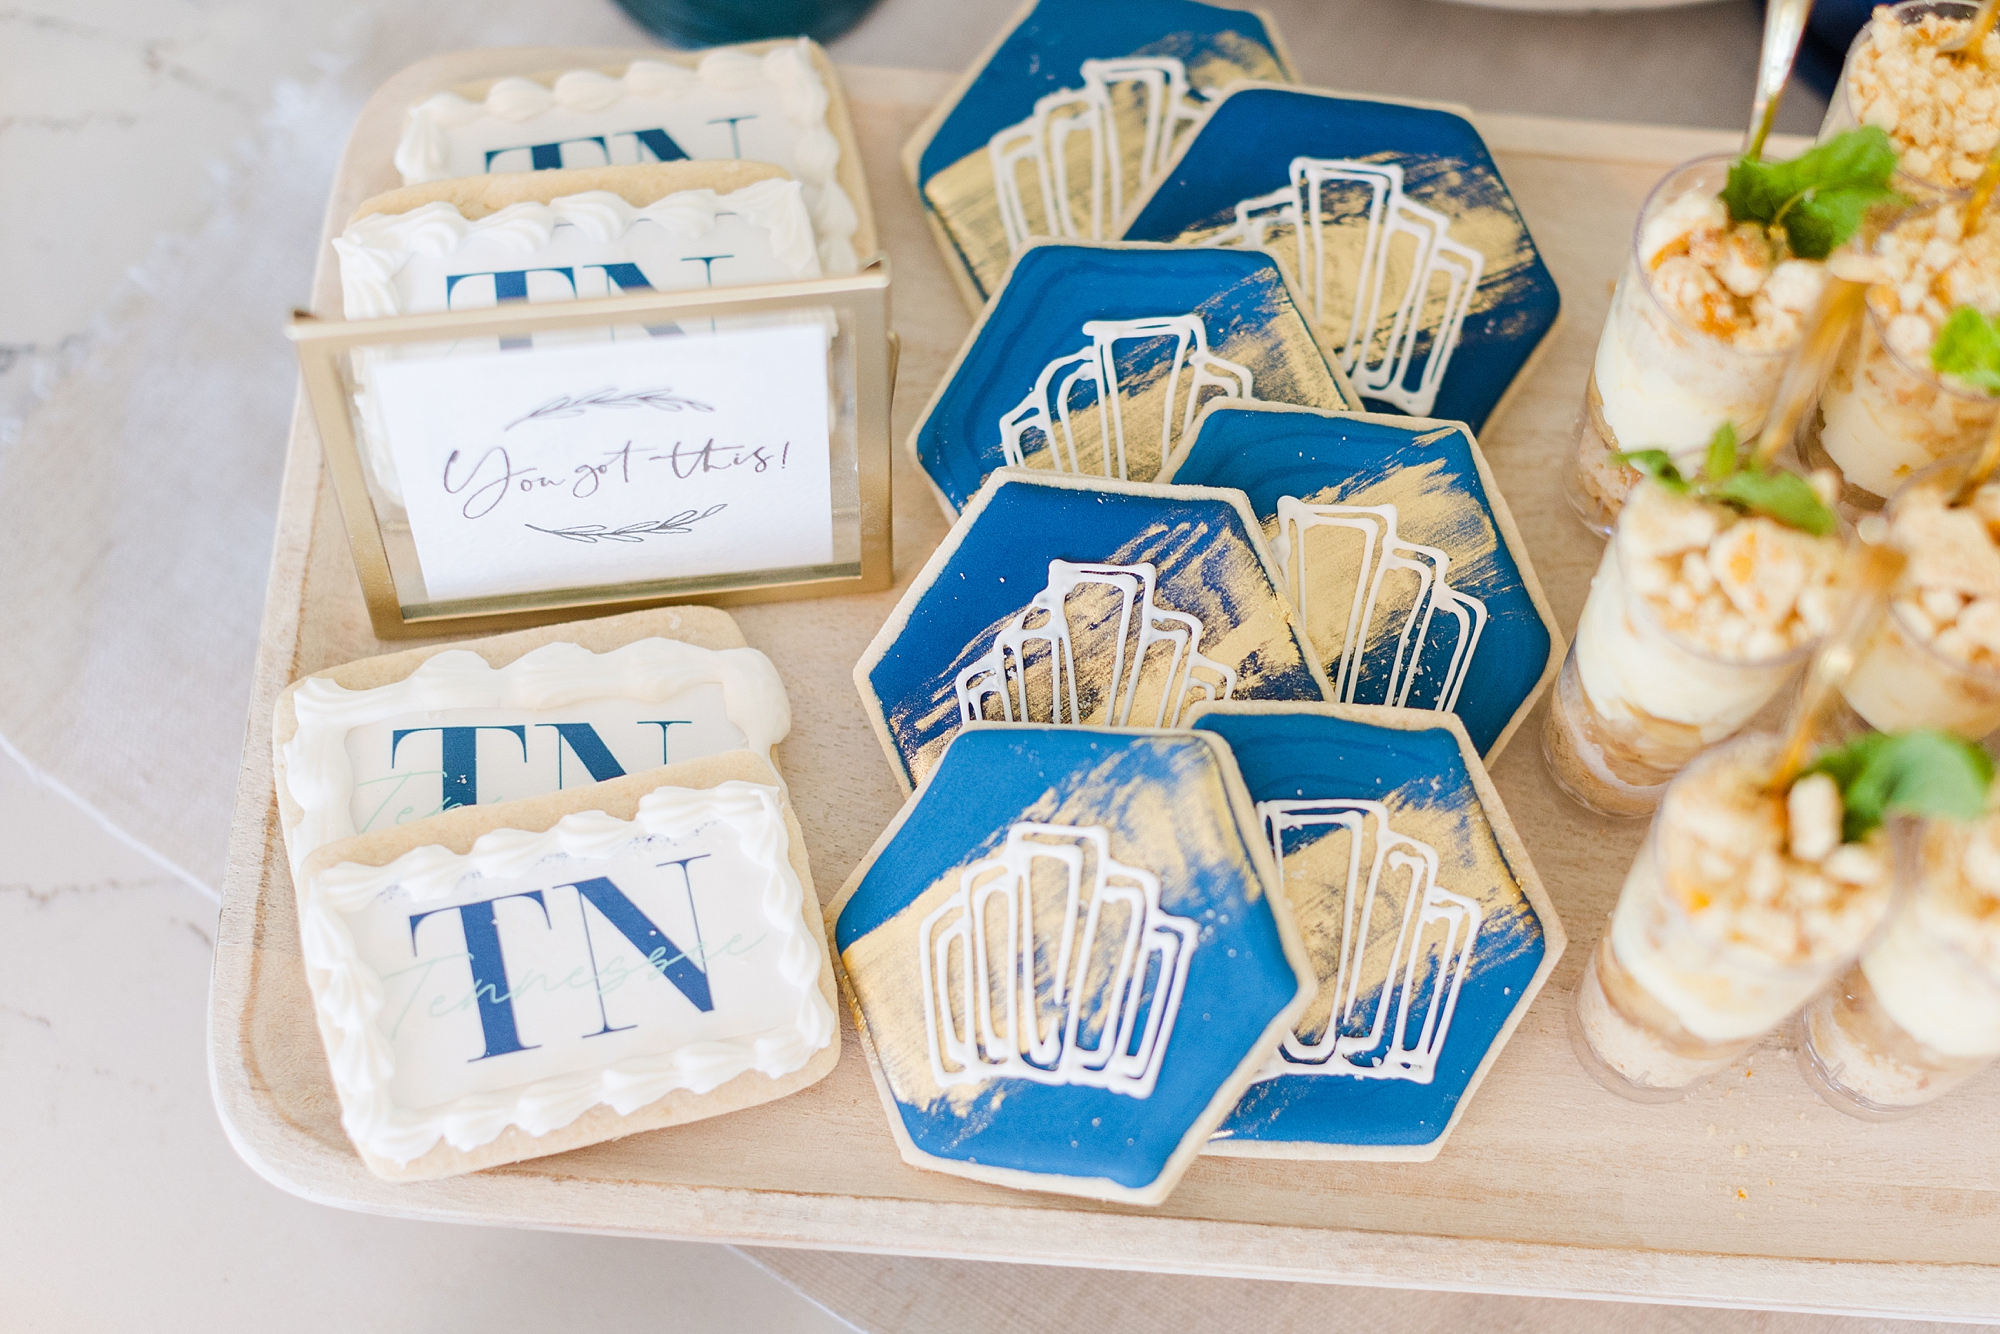 custom cookies for The Sapphire Suite opening day